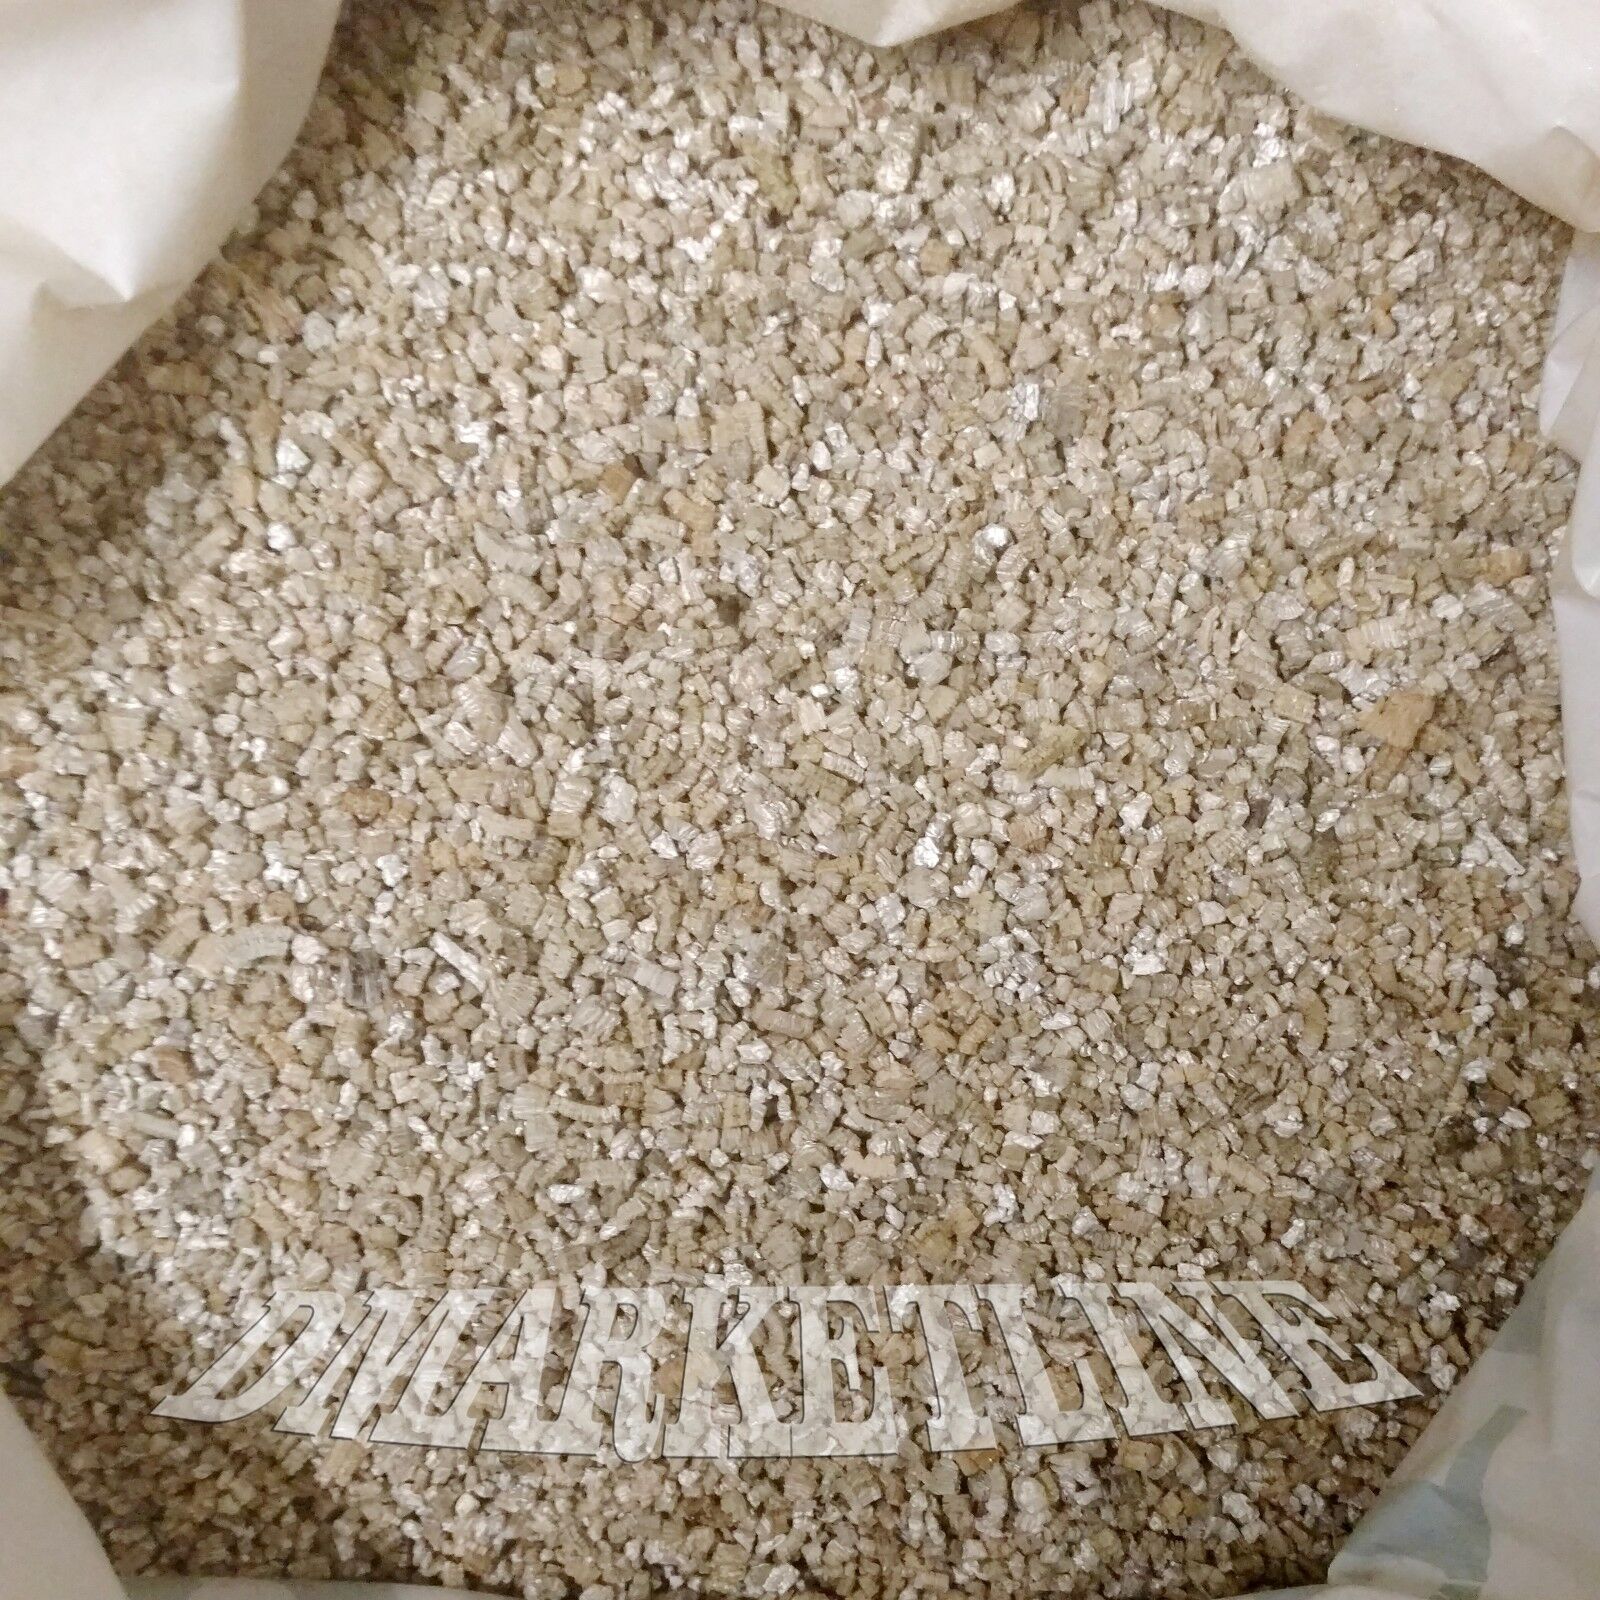 QUALITY VERMICULITE FOR SEED STARTING MEDIUM FINE POTTING GARDEN REPTILE BEDDING